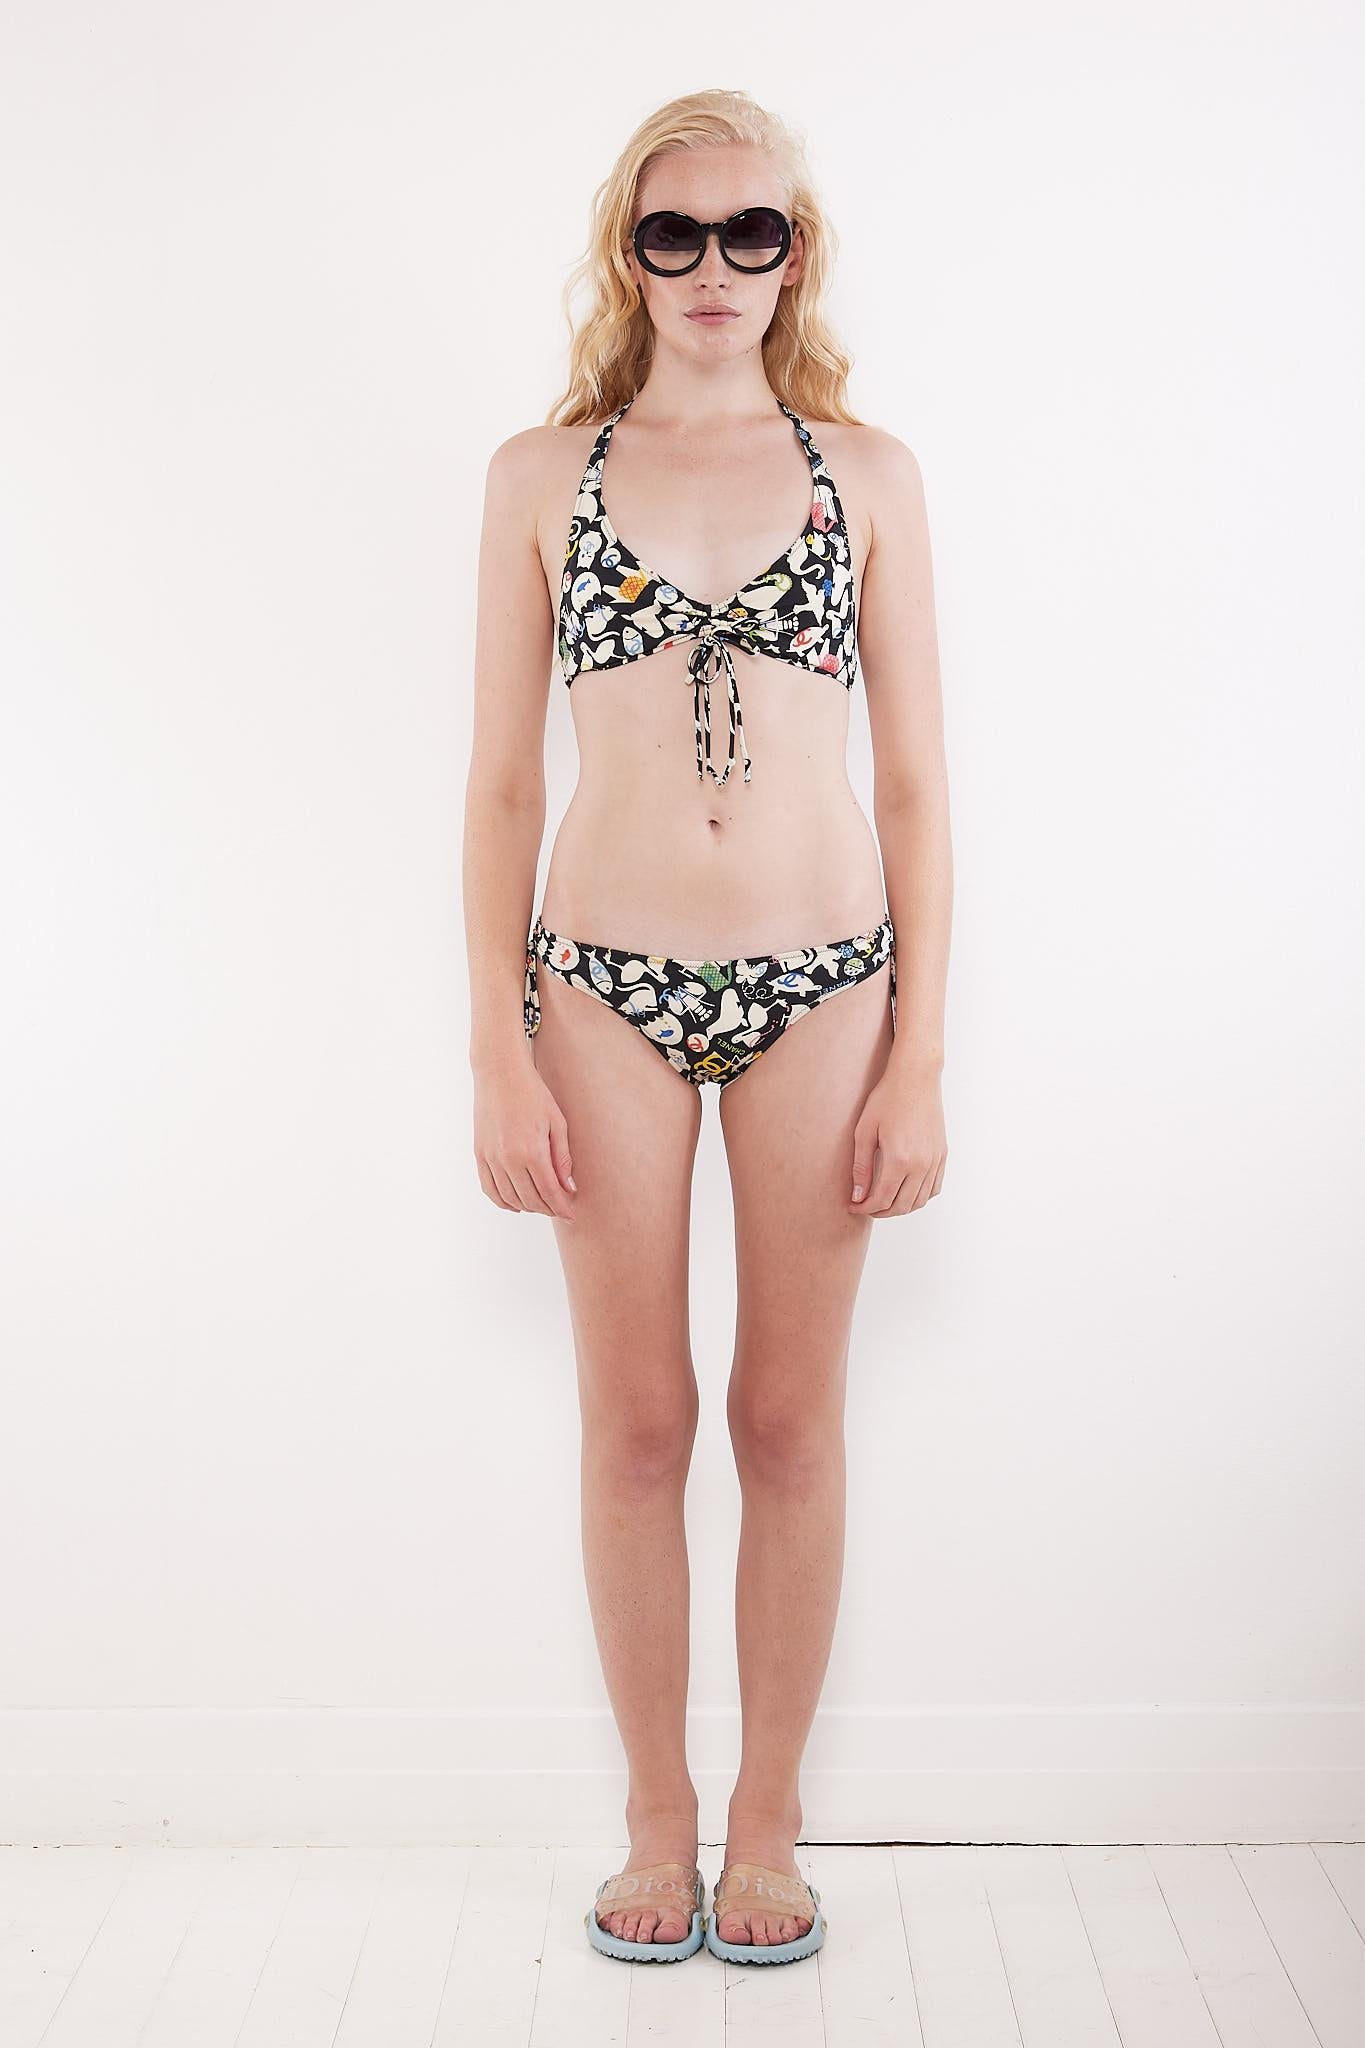 Dating to the S/S 2007 collection, this Karl Lagerfeld designed bikini features an adorable graphic print incorporating different animals & CC logos in a monochrome colour scheme with pops of pink, blue, yellow & green. Comprising a halter style top